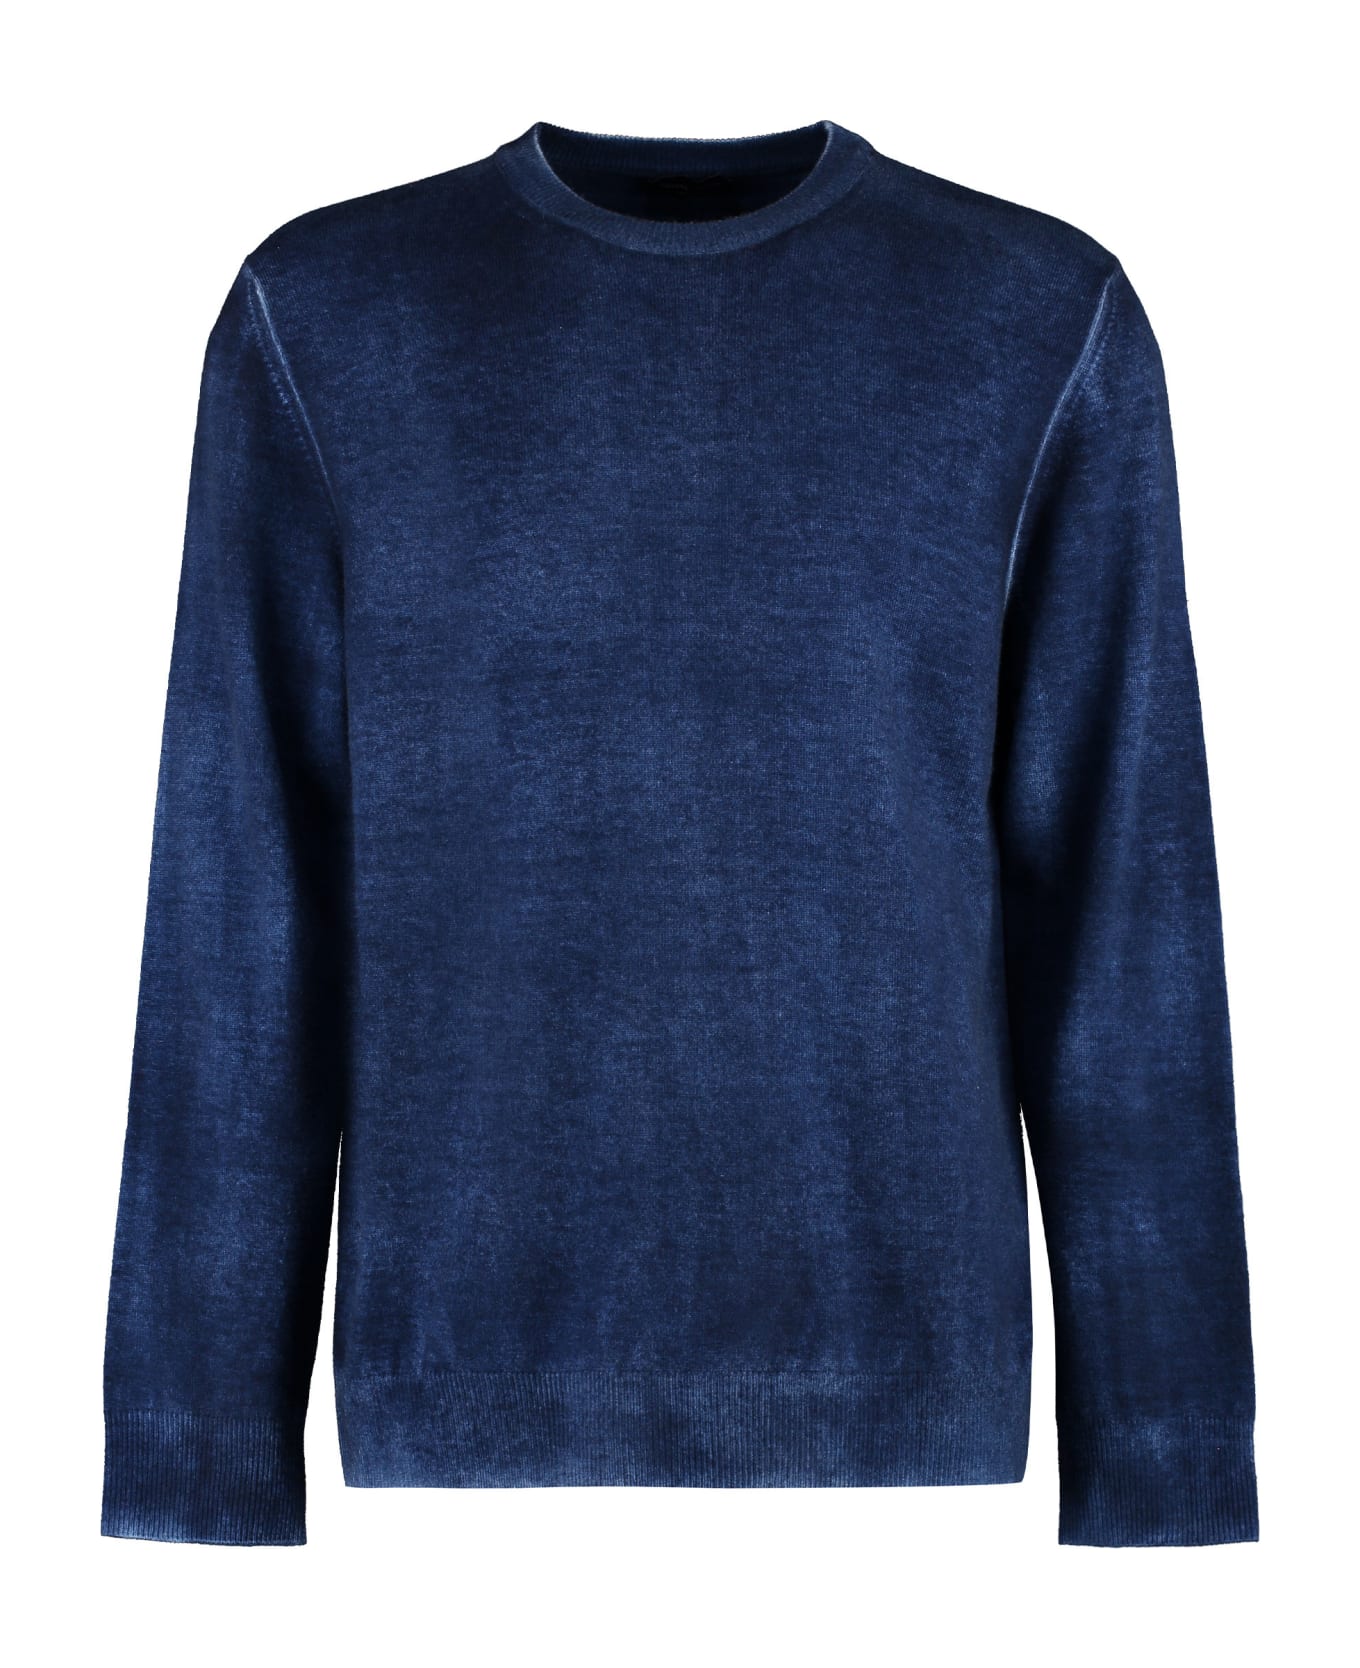 Roberto Collina Wool And Cashmere Sweater - blue フリース